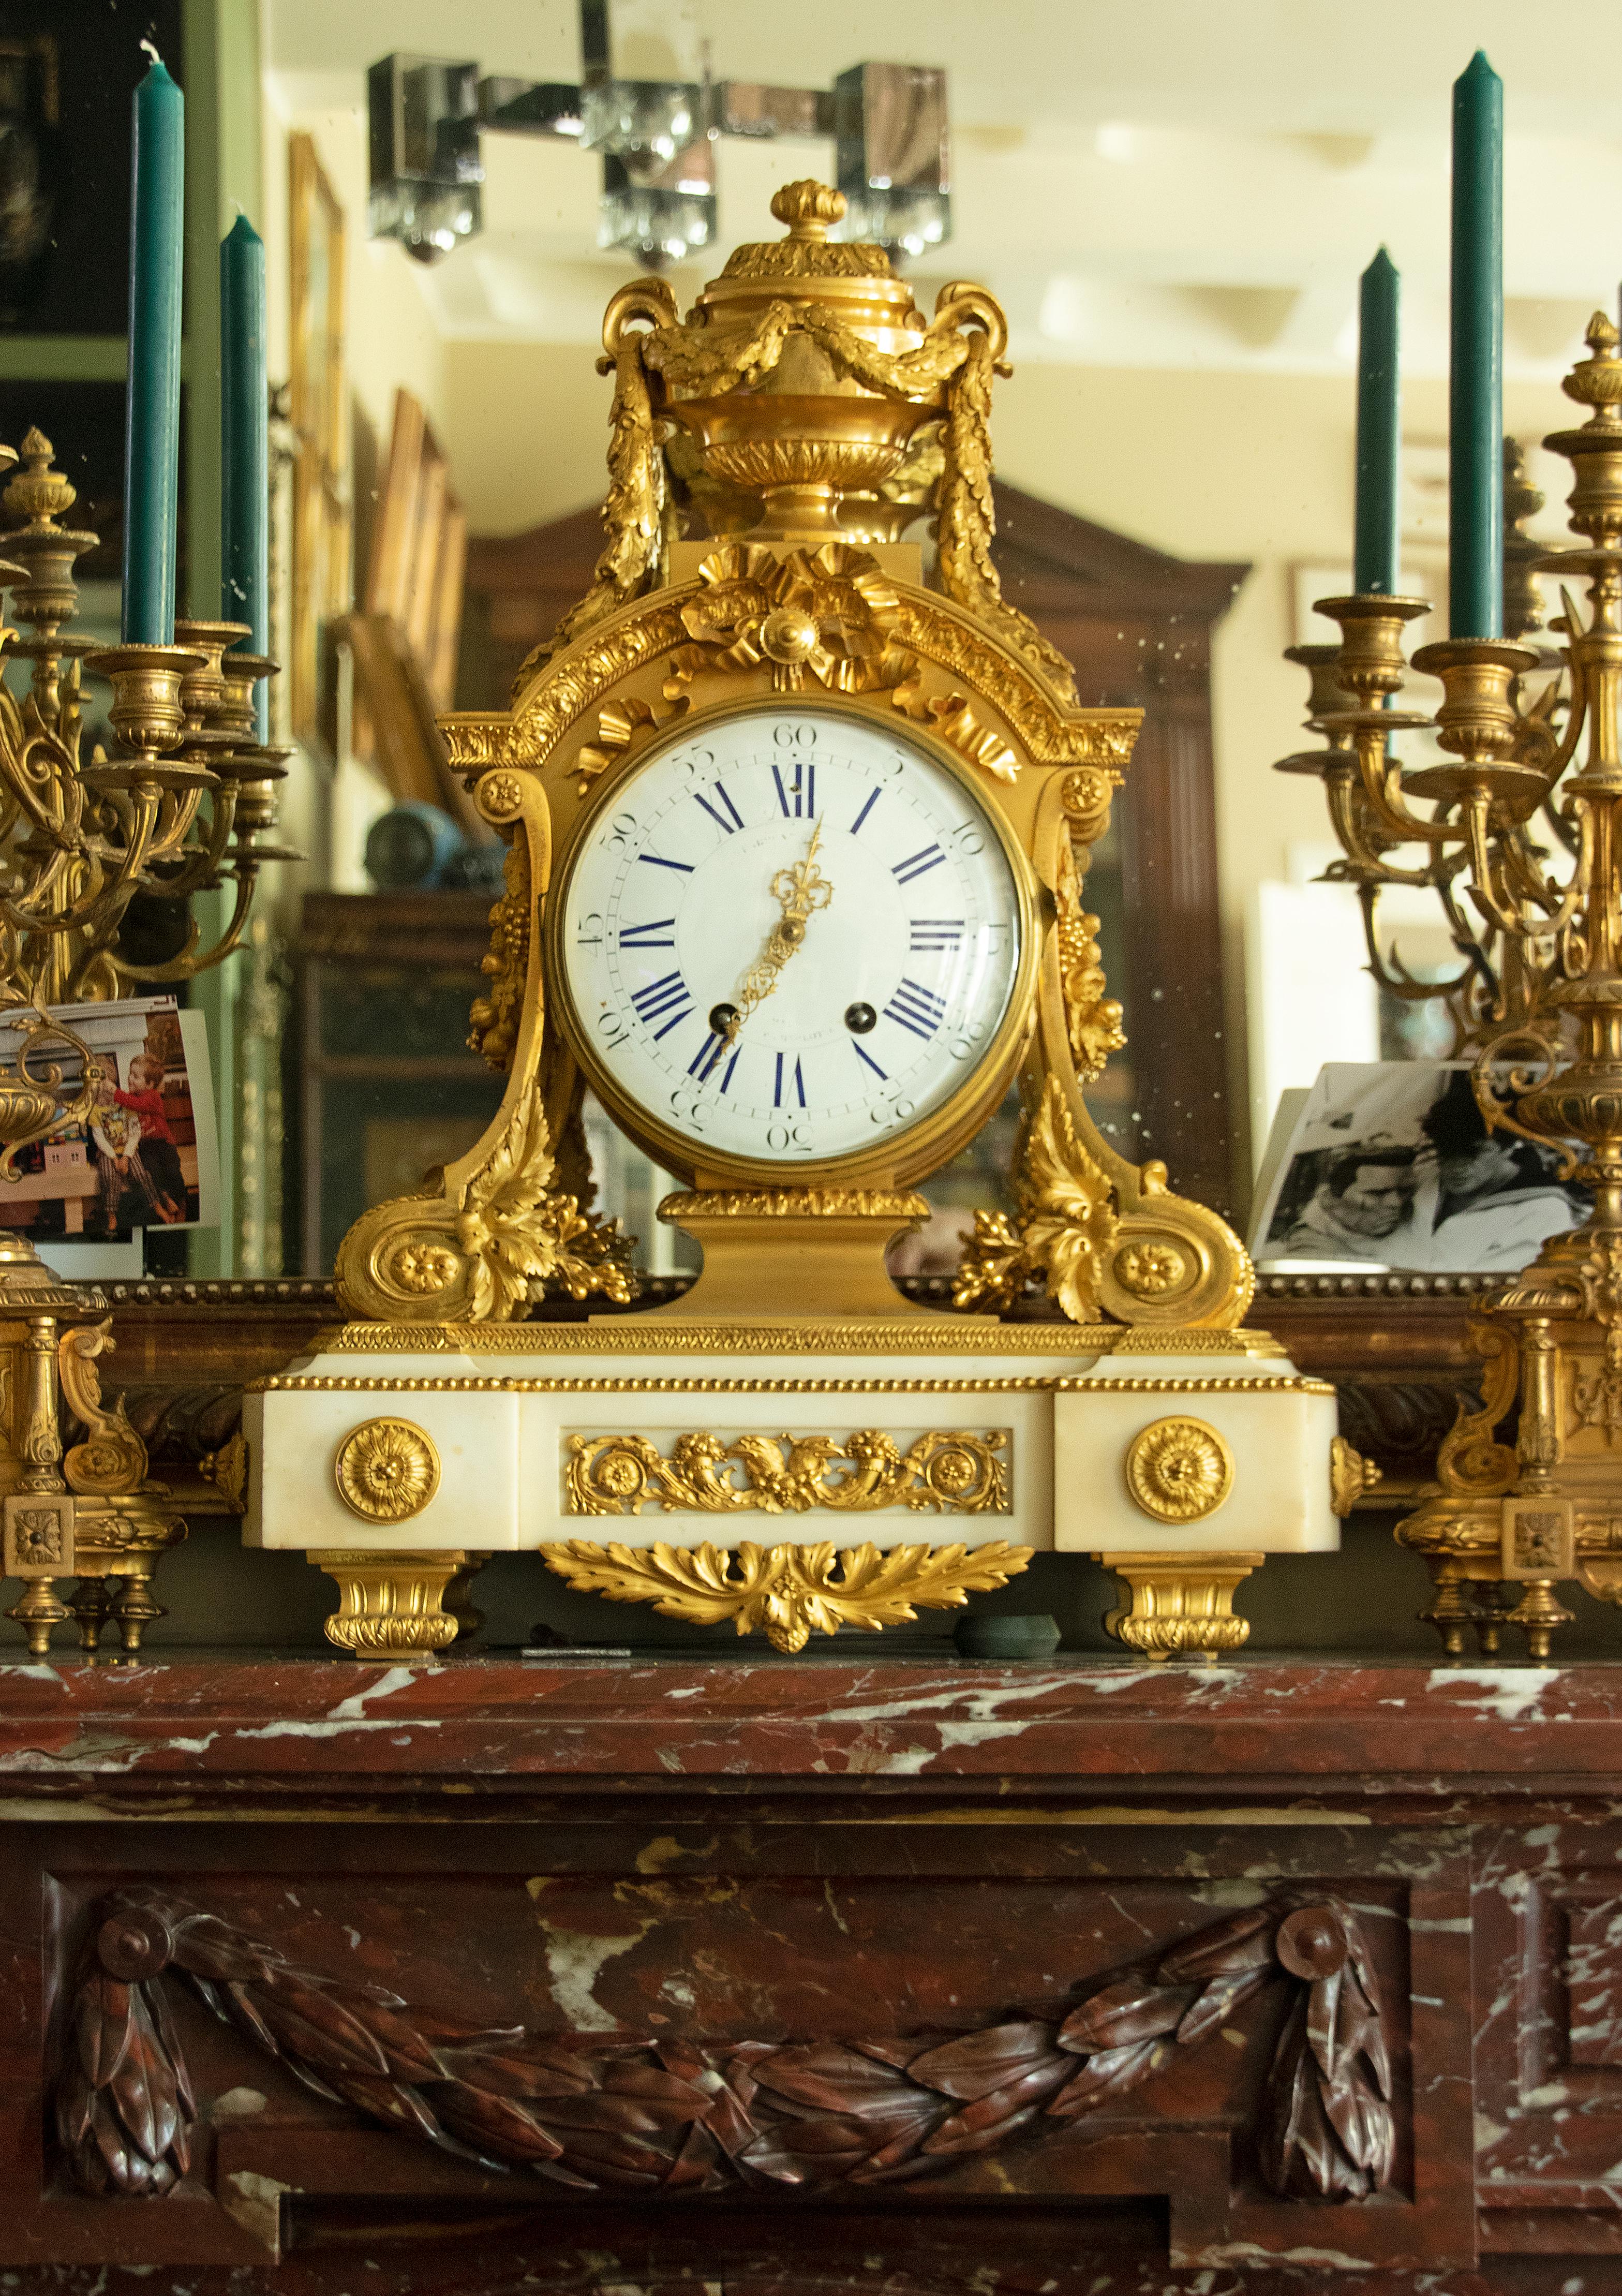 A large and richly decorated ormolu bronze mantel clock on a white carrara marble base. The clock is embellished all around with bronze ornaments in Louis XVI style; a lidded coupe with a garland of oak leaf on top, tied bow and floral motives. The